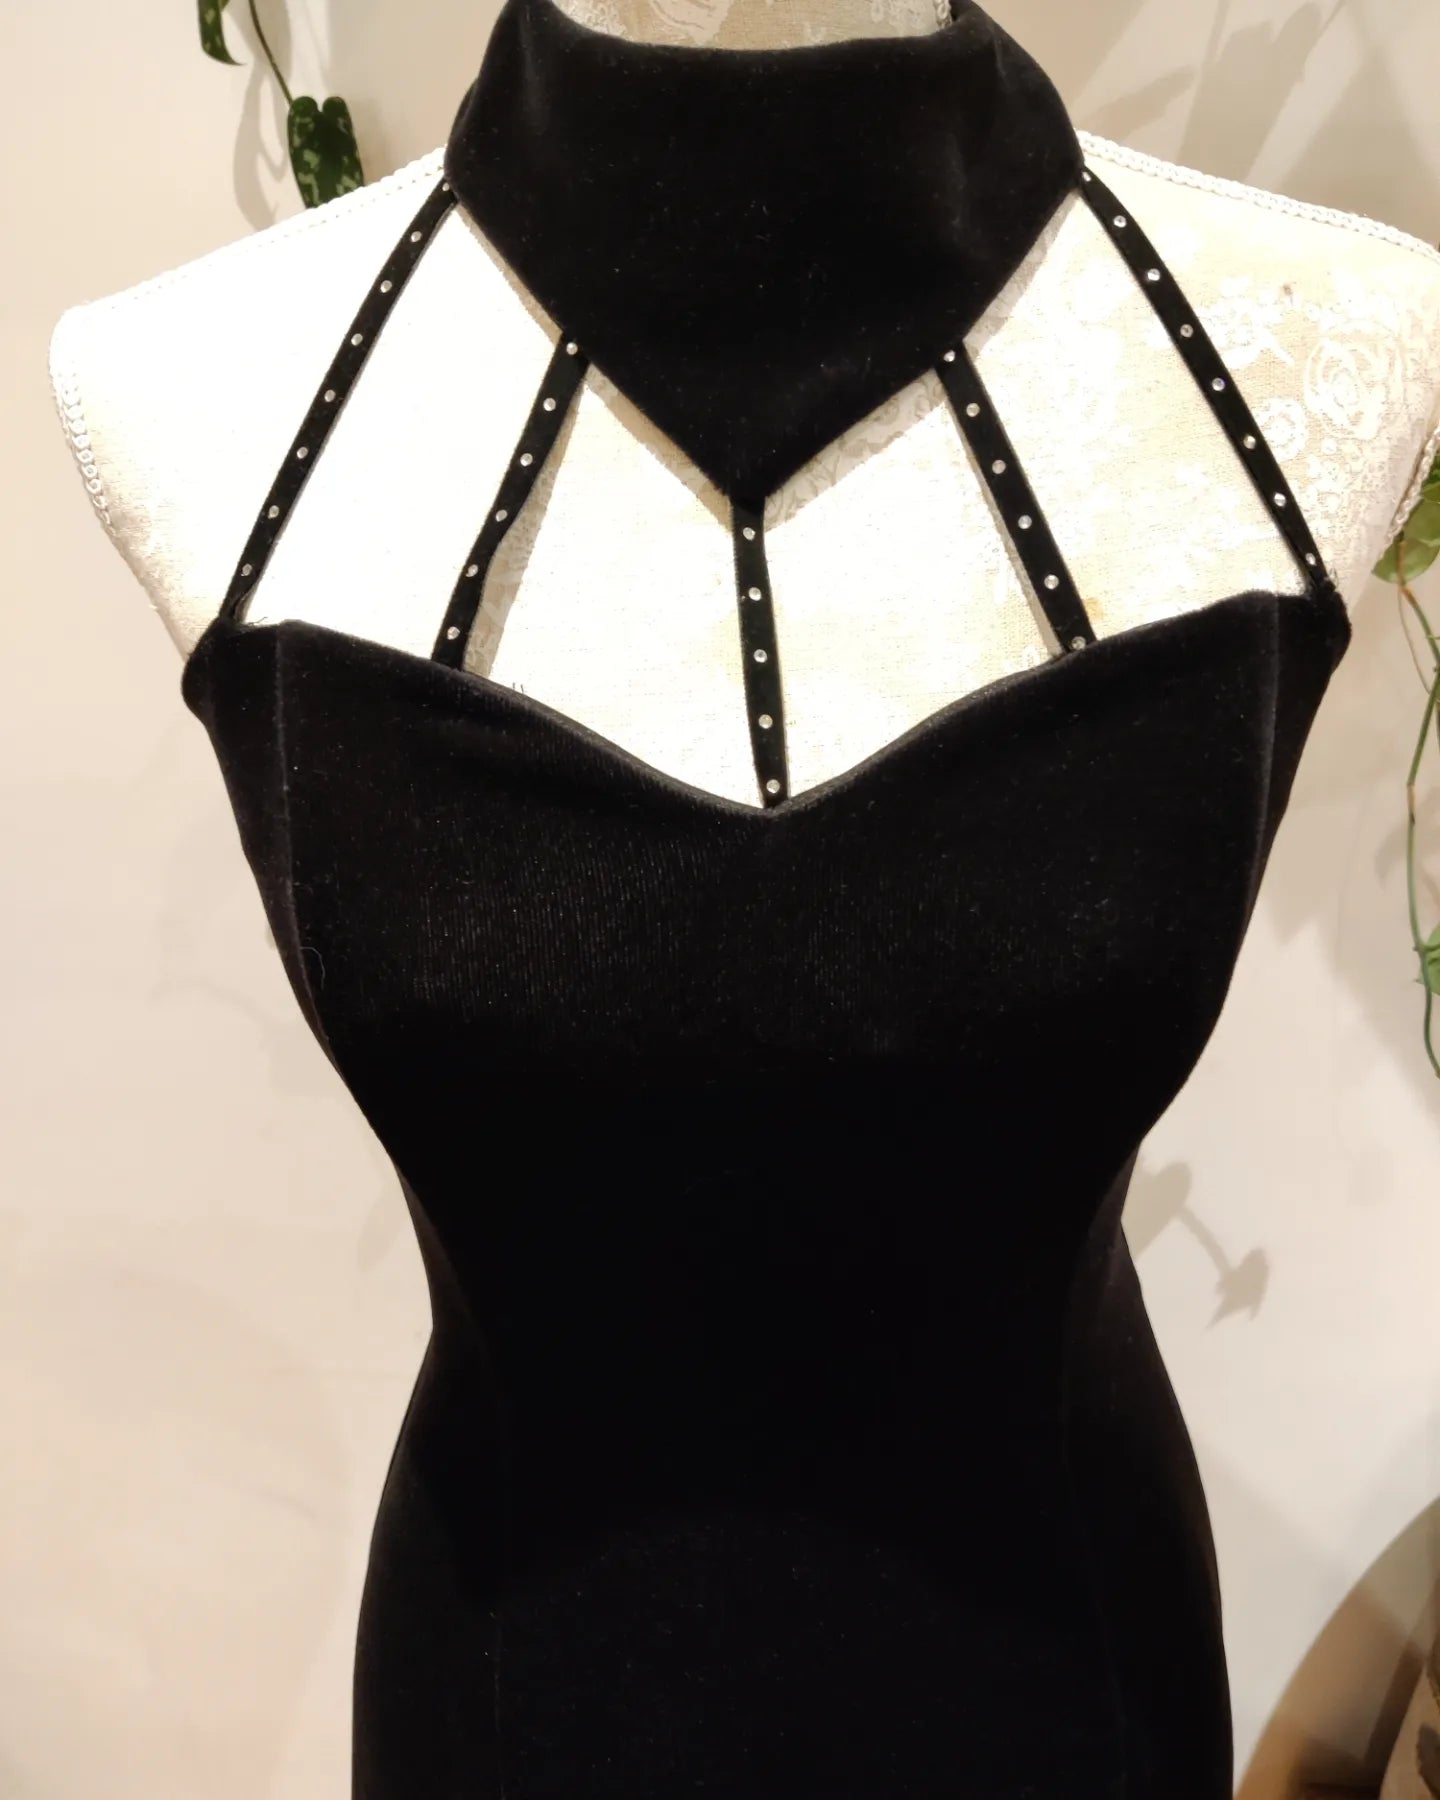 Incredibly sexy black velvet dress with cage detail. size 8.